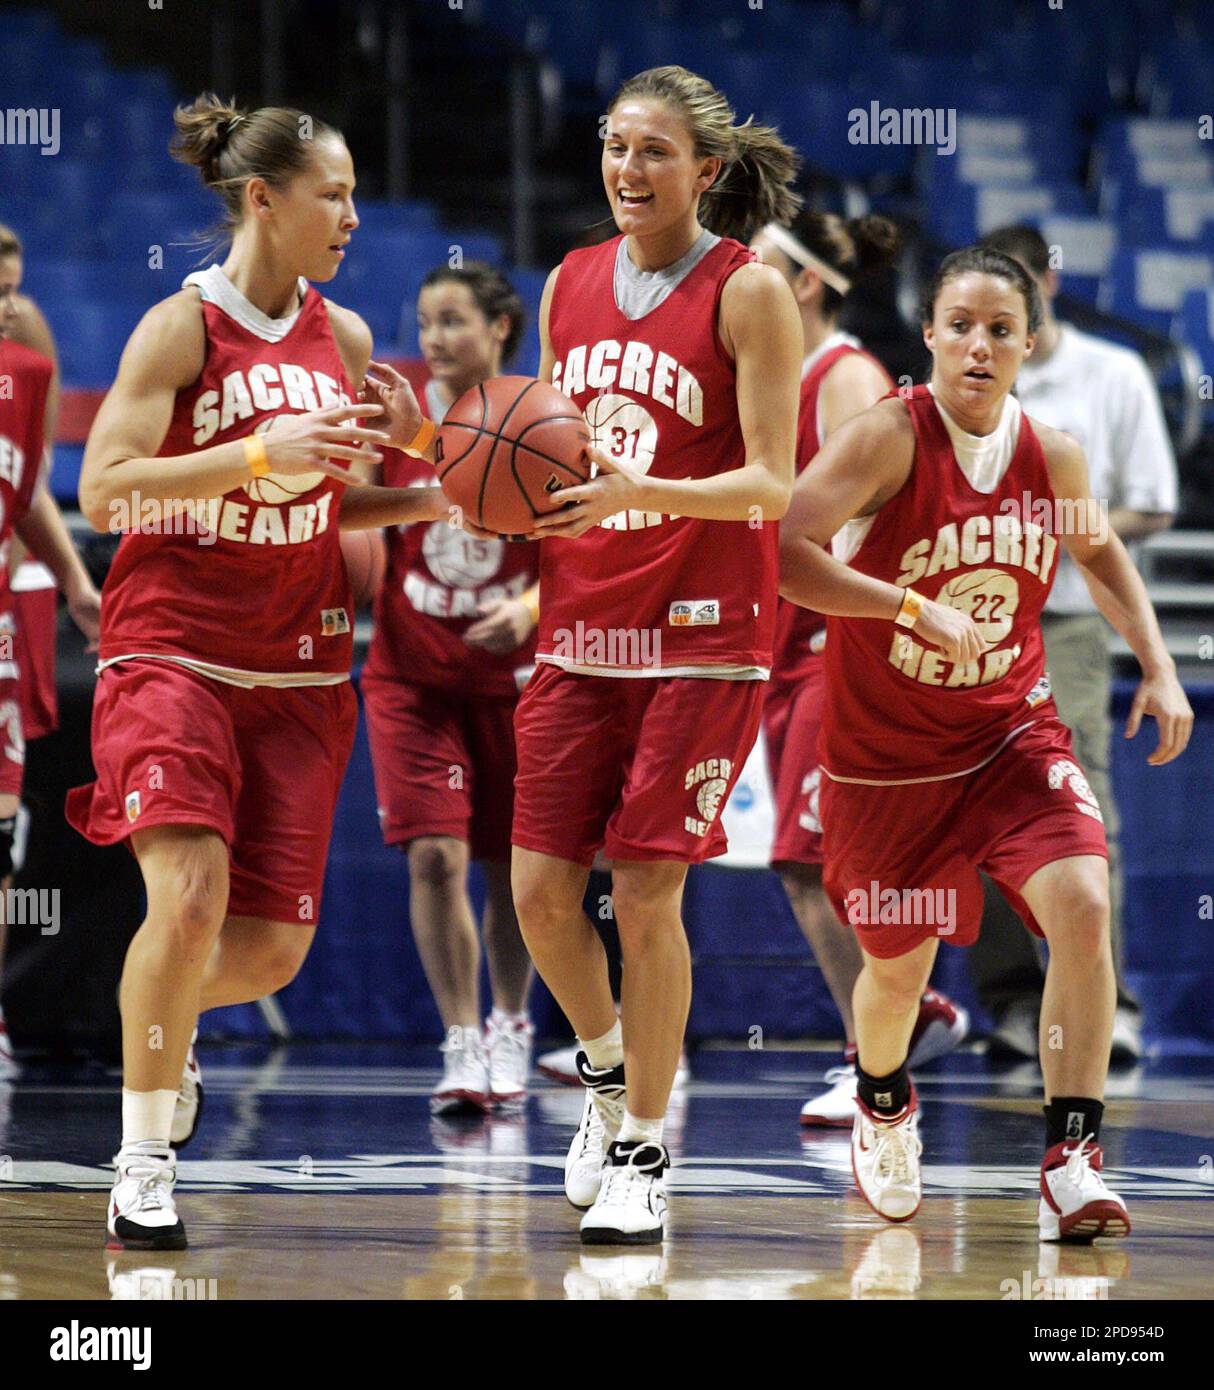 Sacred Heart's Nicole Rubino, left, Amanda Pape, center, and Kerri Burke, right, run through a drill during a practice session on Saturday, March 18, 2006, in State College, Pa., the day before the First Round play of the 2006 NCAA Division I Women's Basketball Championship. (AP Photo/Carolyn Kaster) Stock Photo